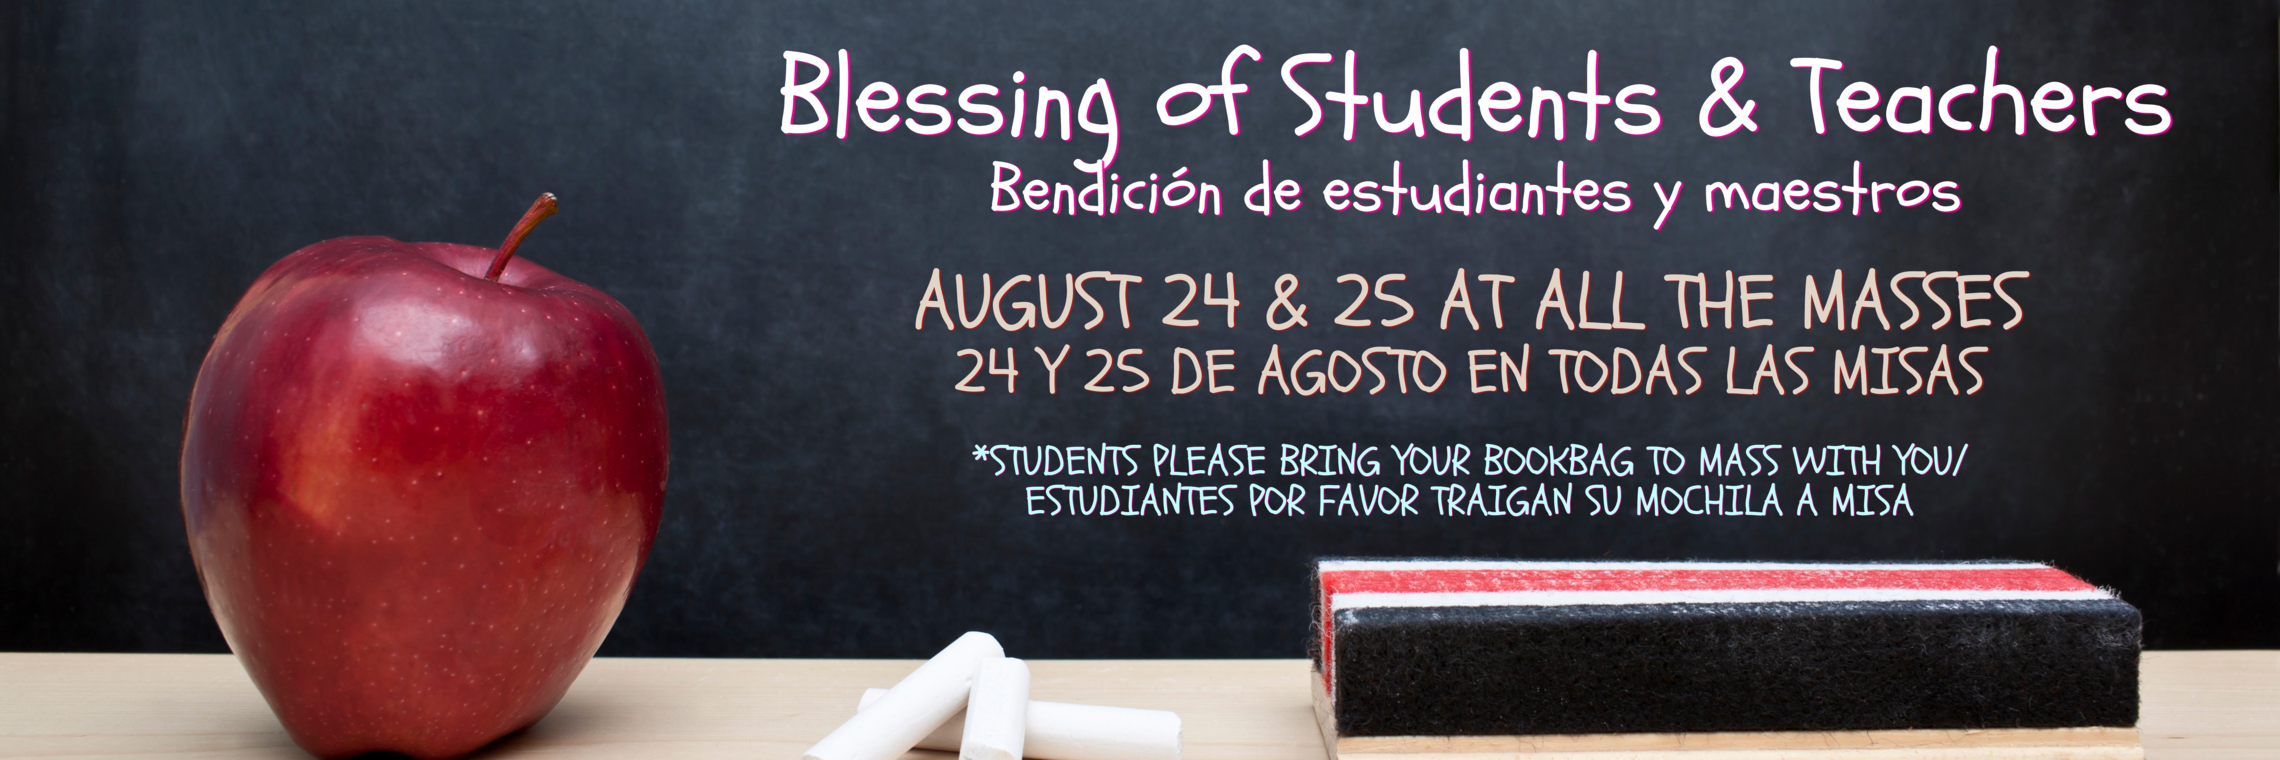 Blessing Of Students And Teachers Web